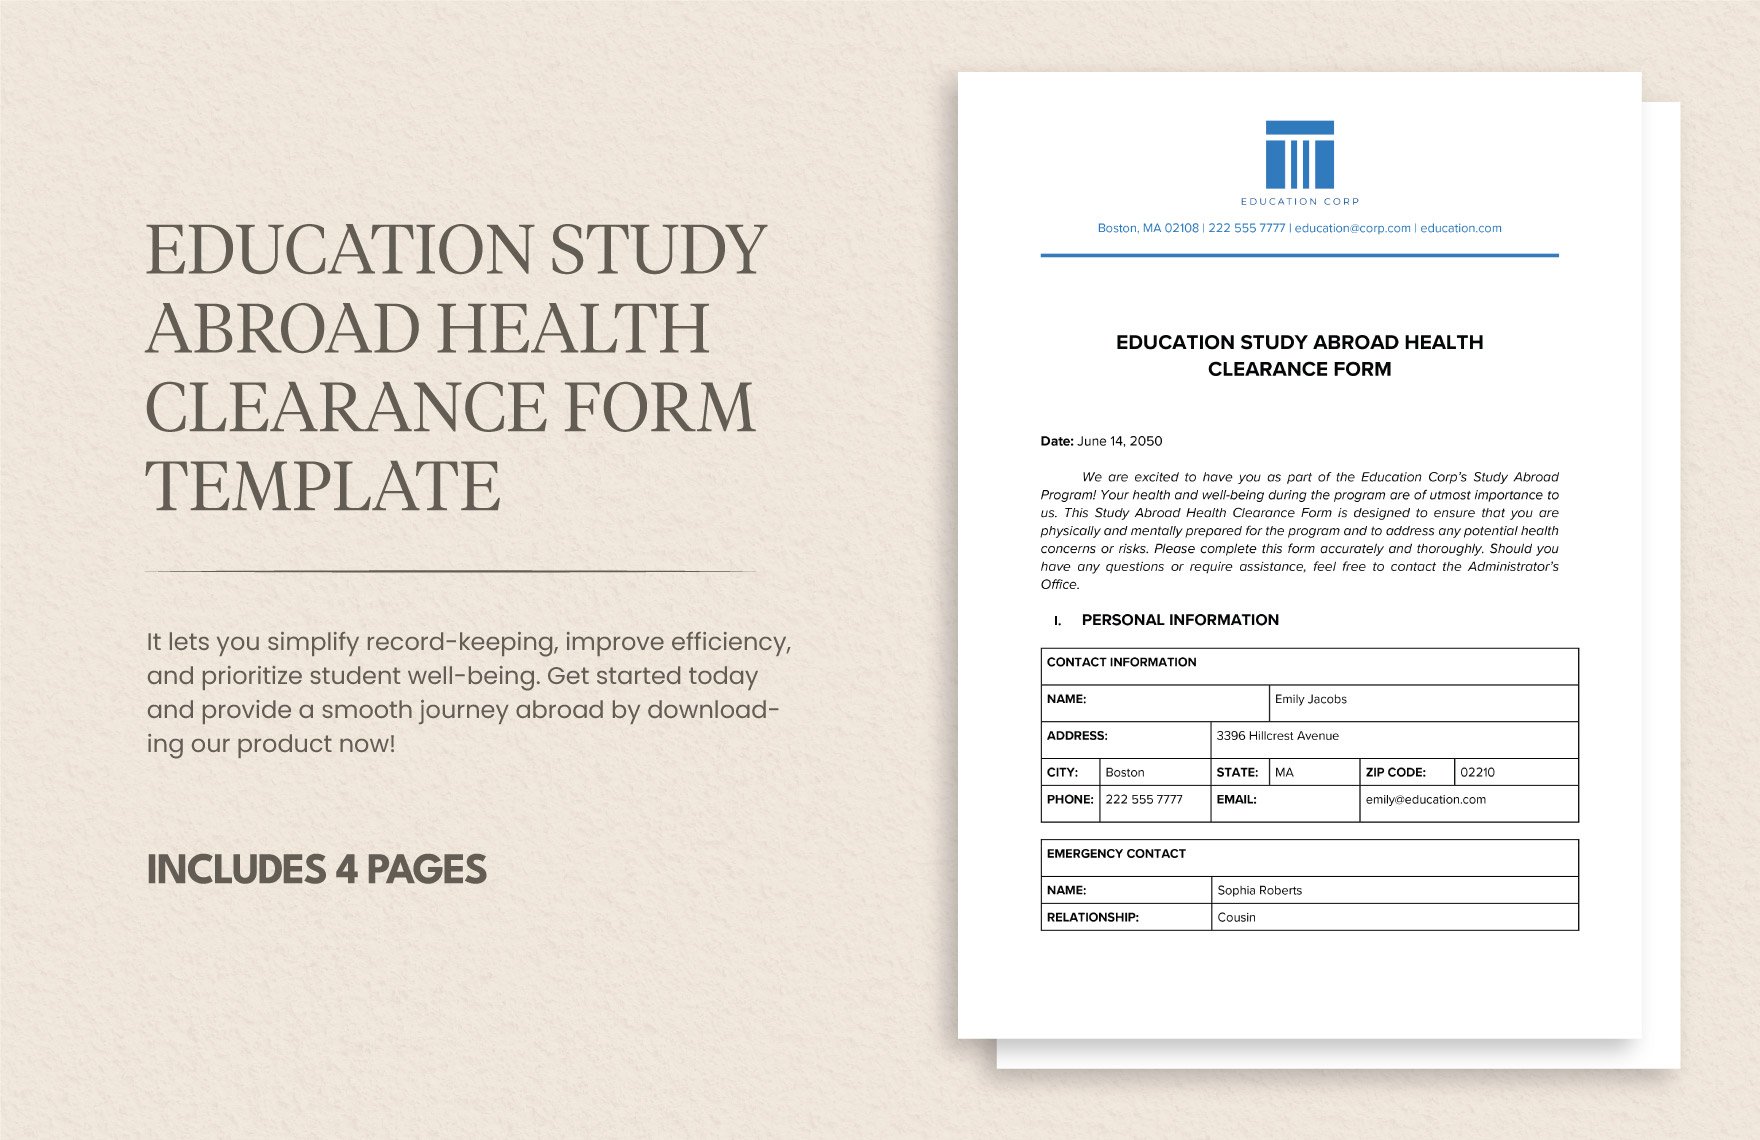 Education Study Abroad Health Clearance Form Template